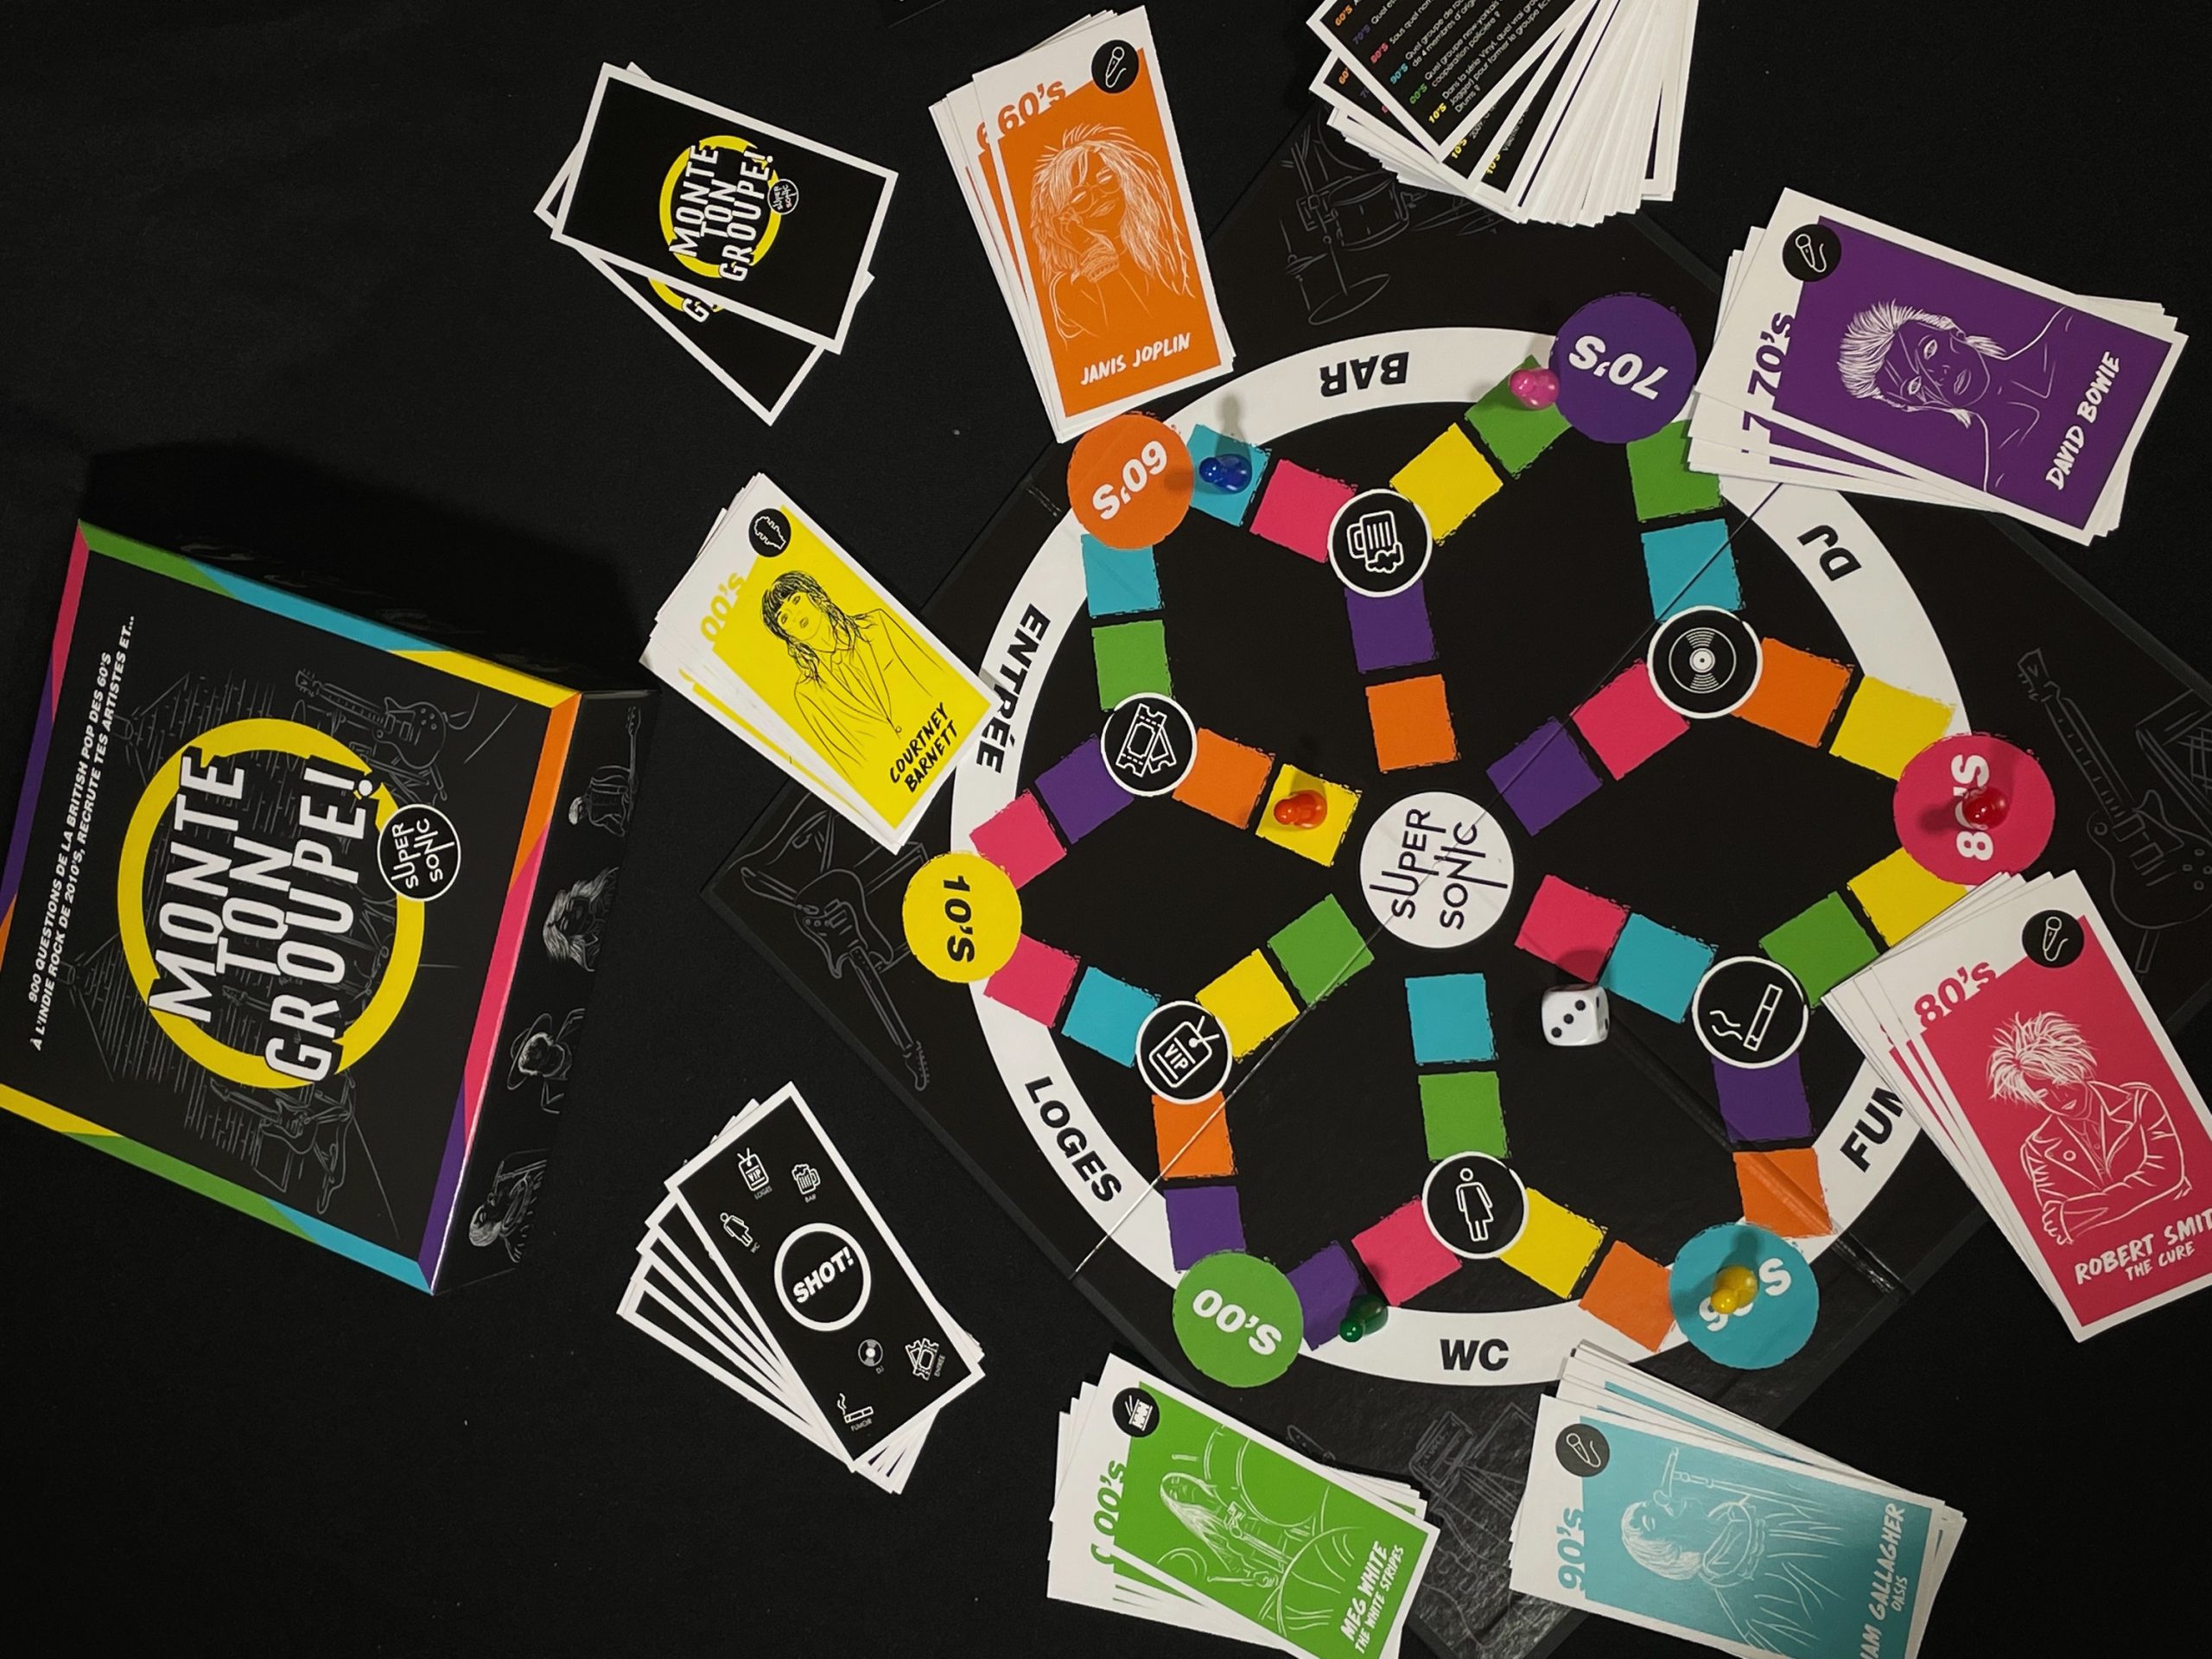 Supersonic Room launches its own board game